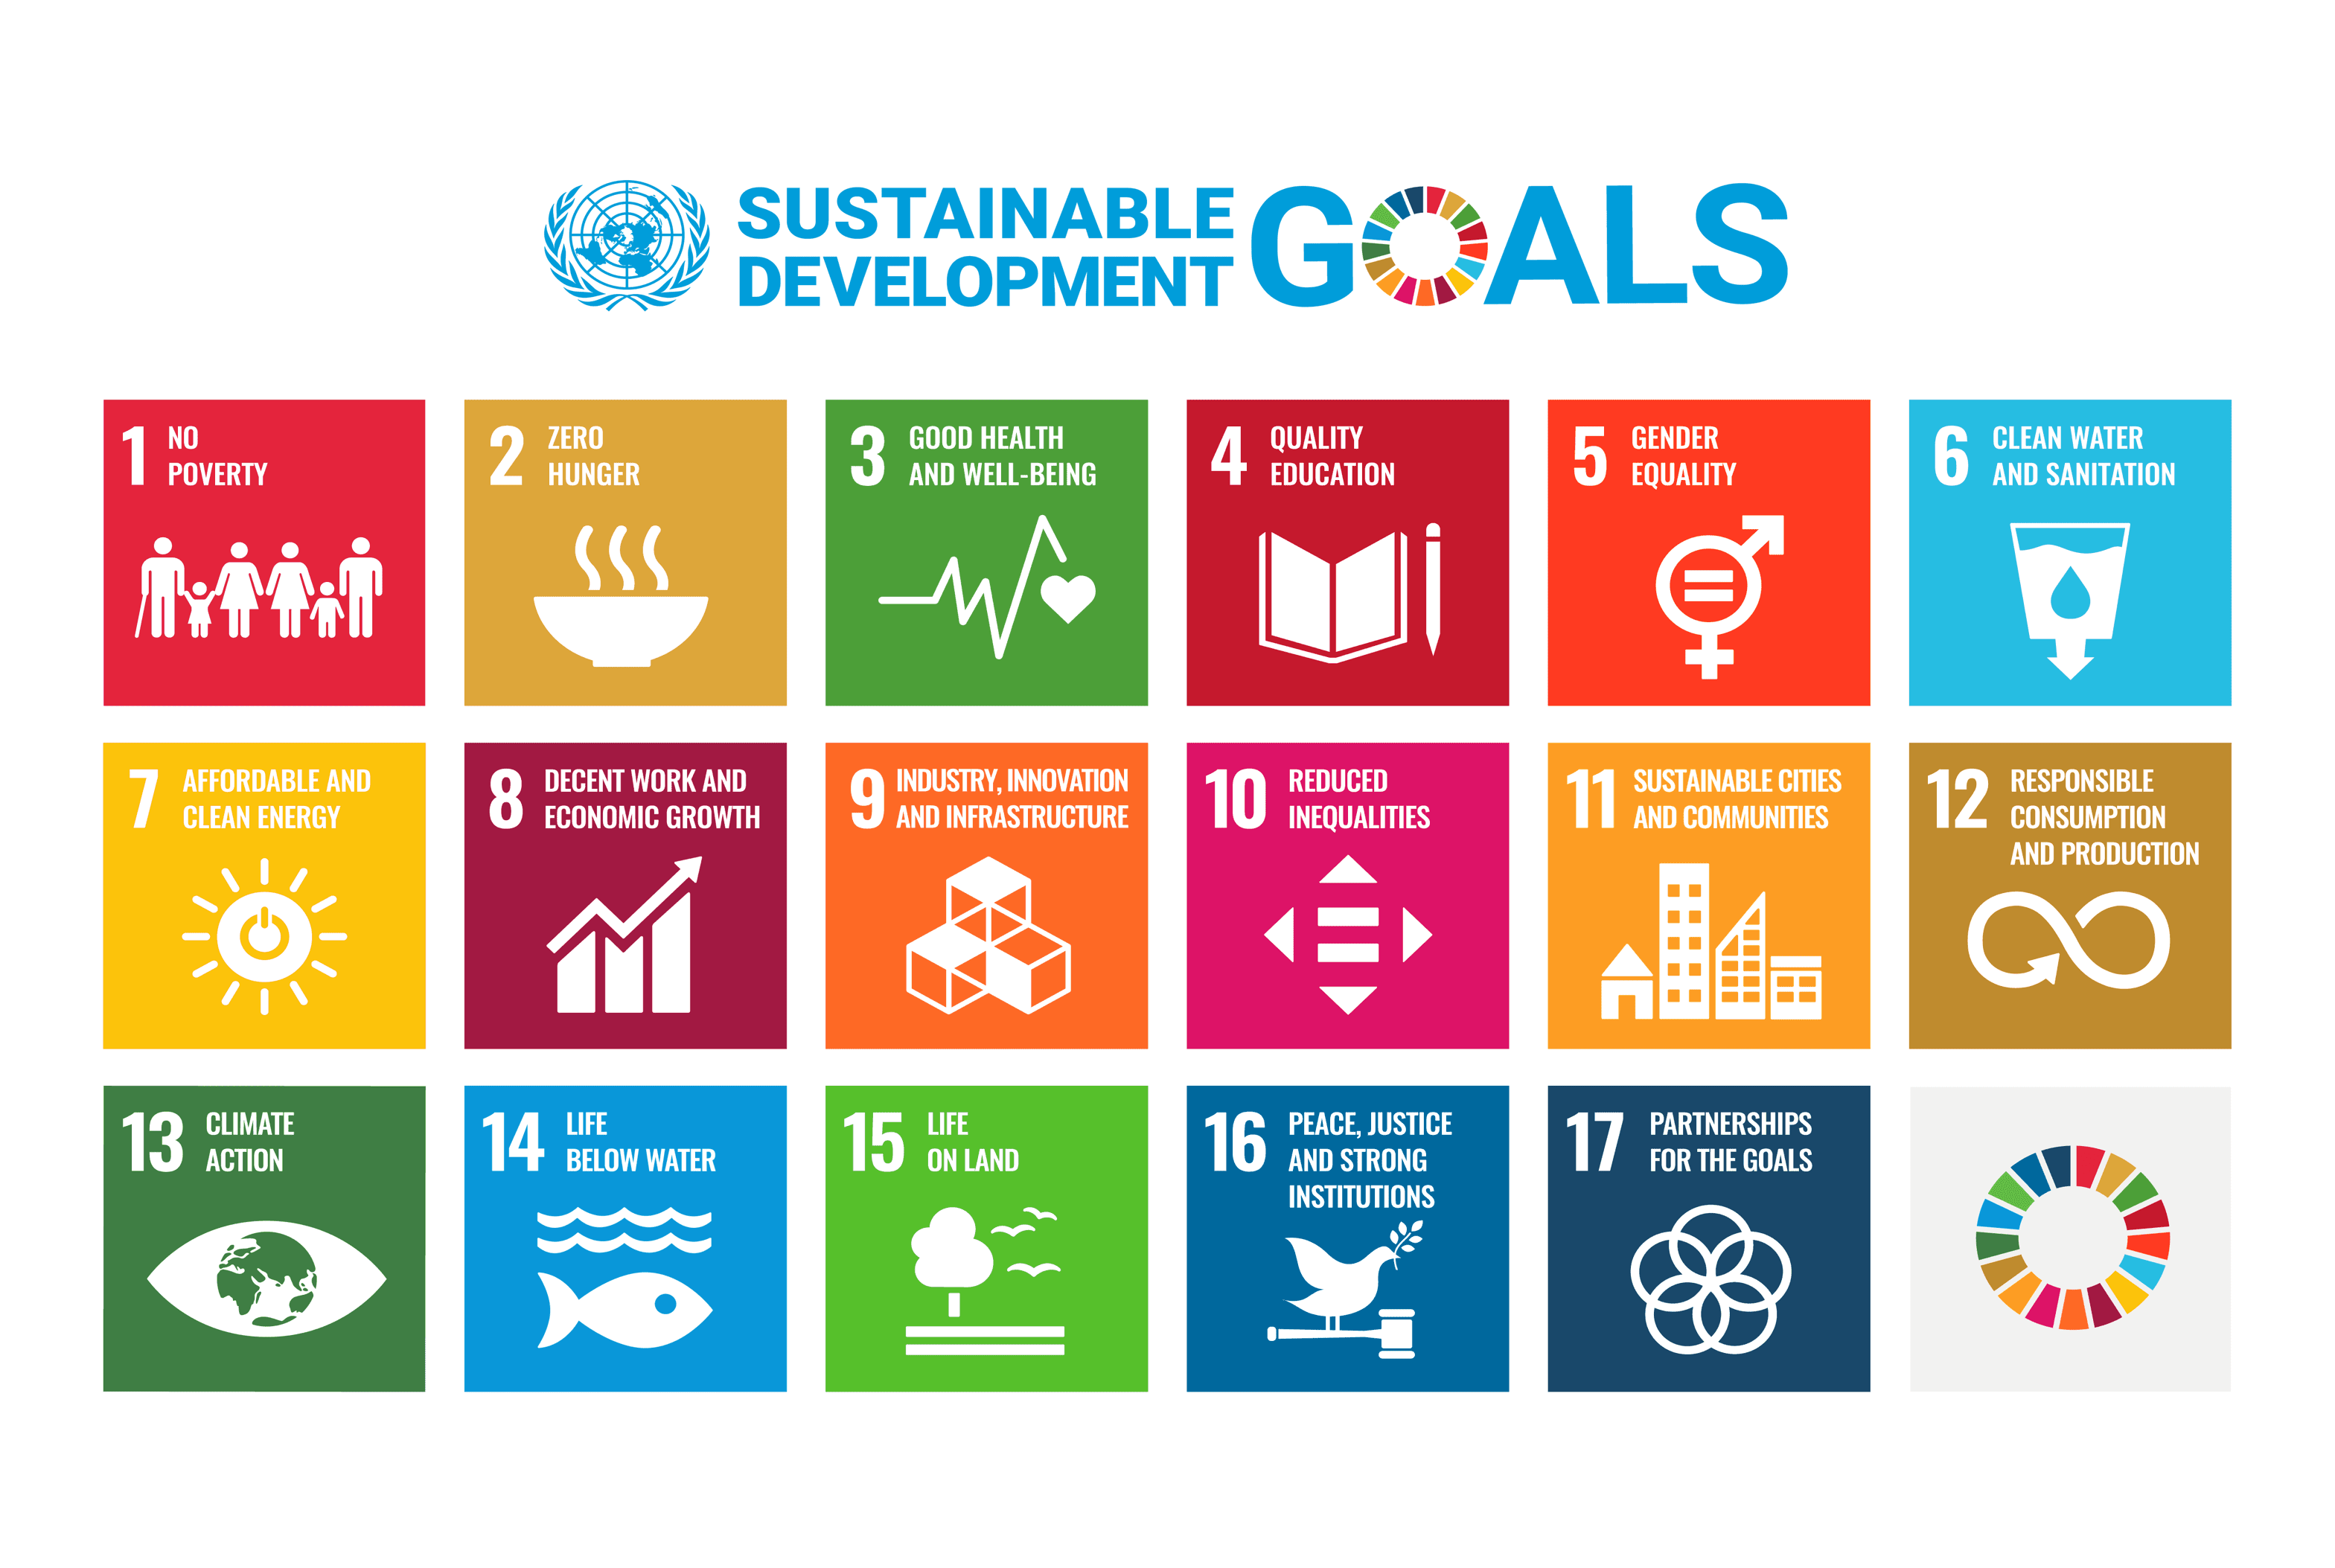 Product IoT Key to Meeting Sustainable Development Goals 2030 - Counterpoint Research image